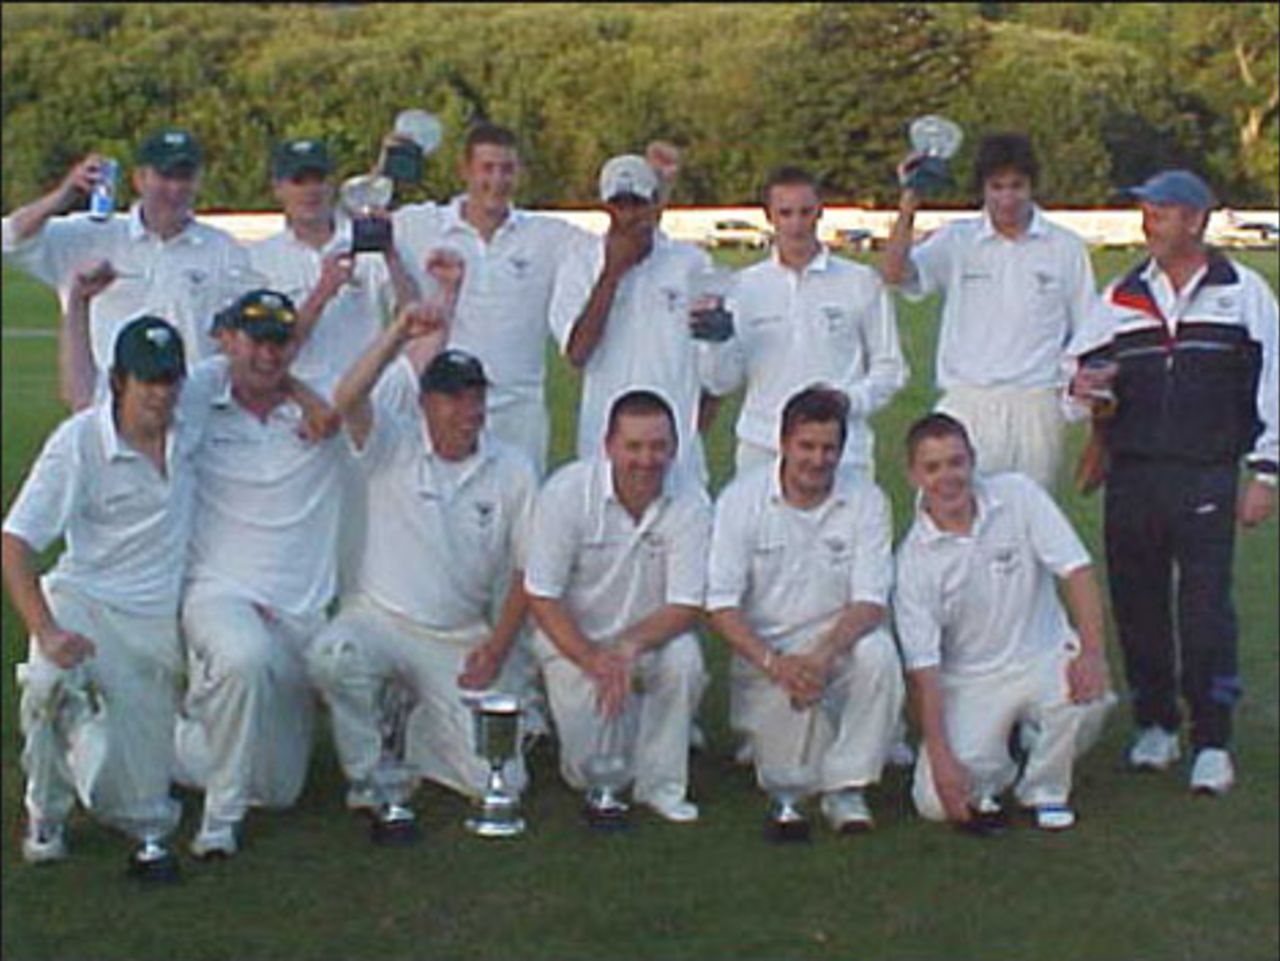 Ramsbottom retained the 2nd XI Cup by beating Haslingden at Acre Bottom by 21 runs